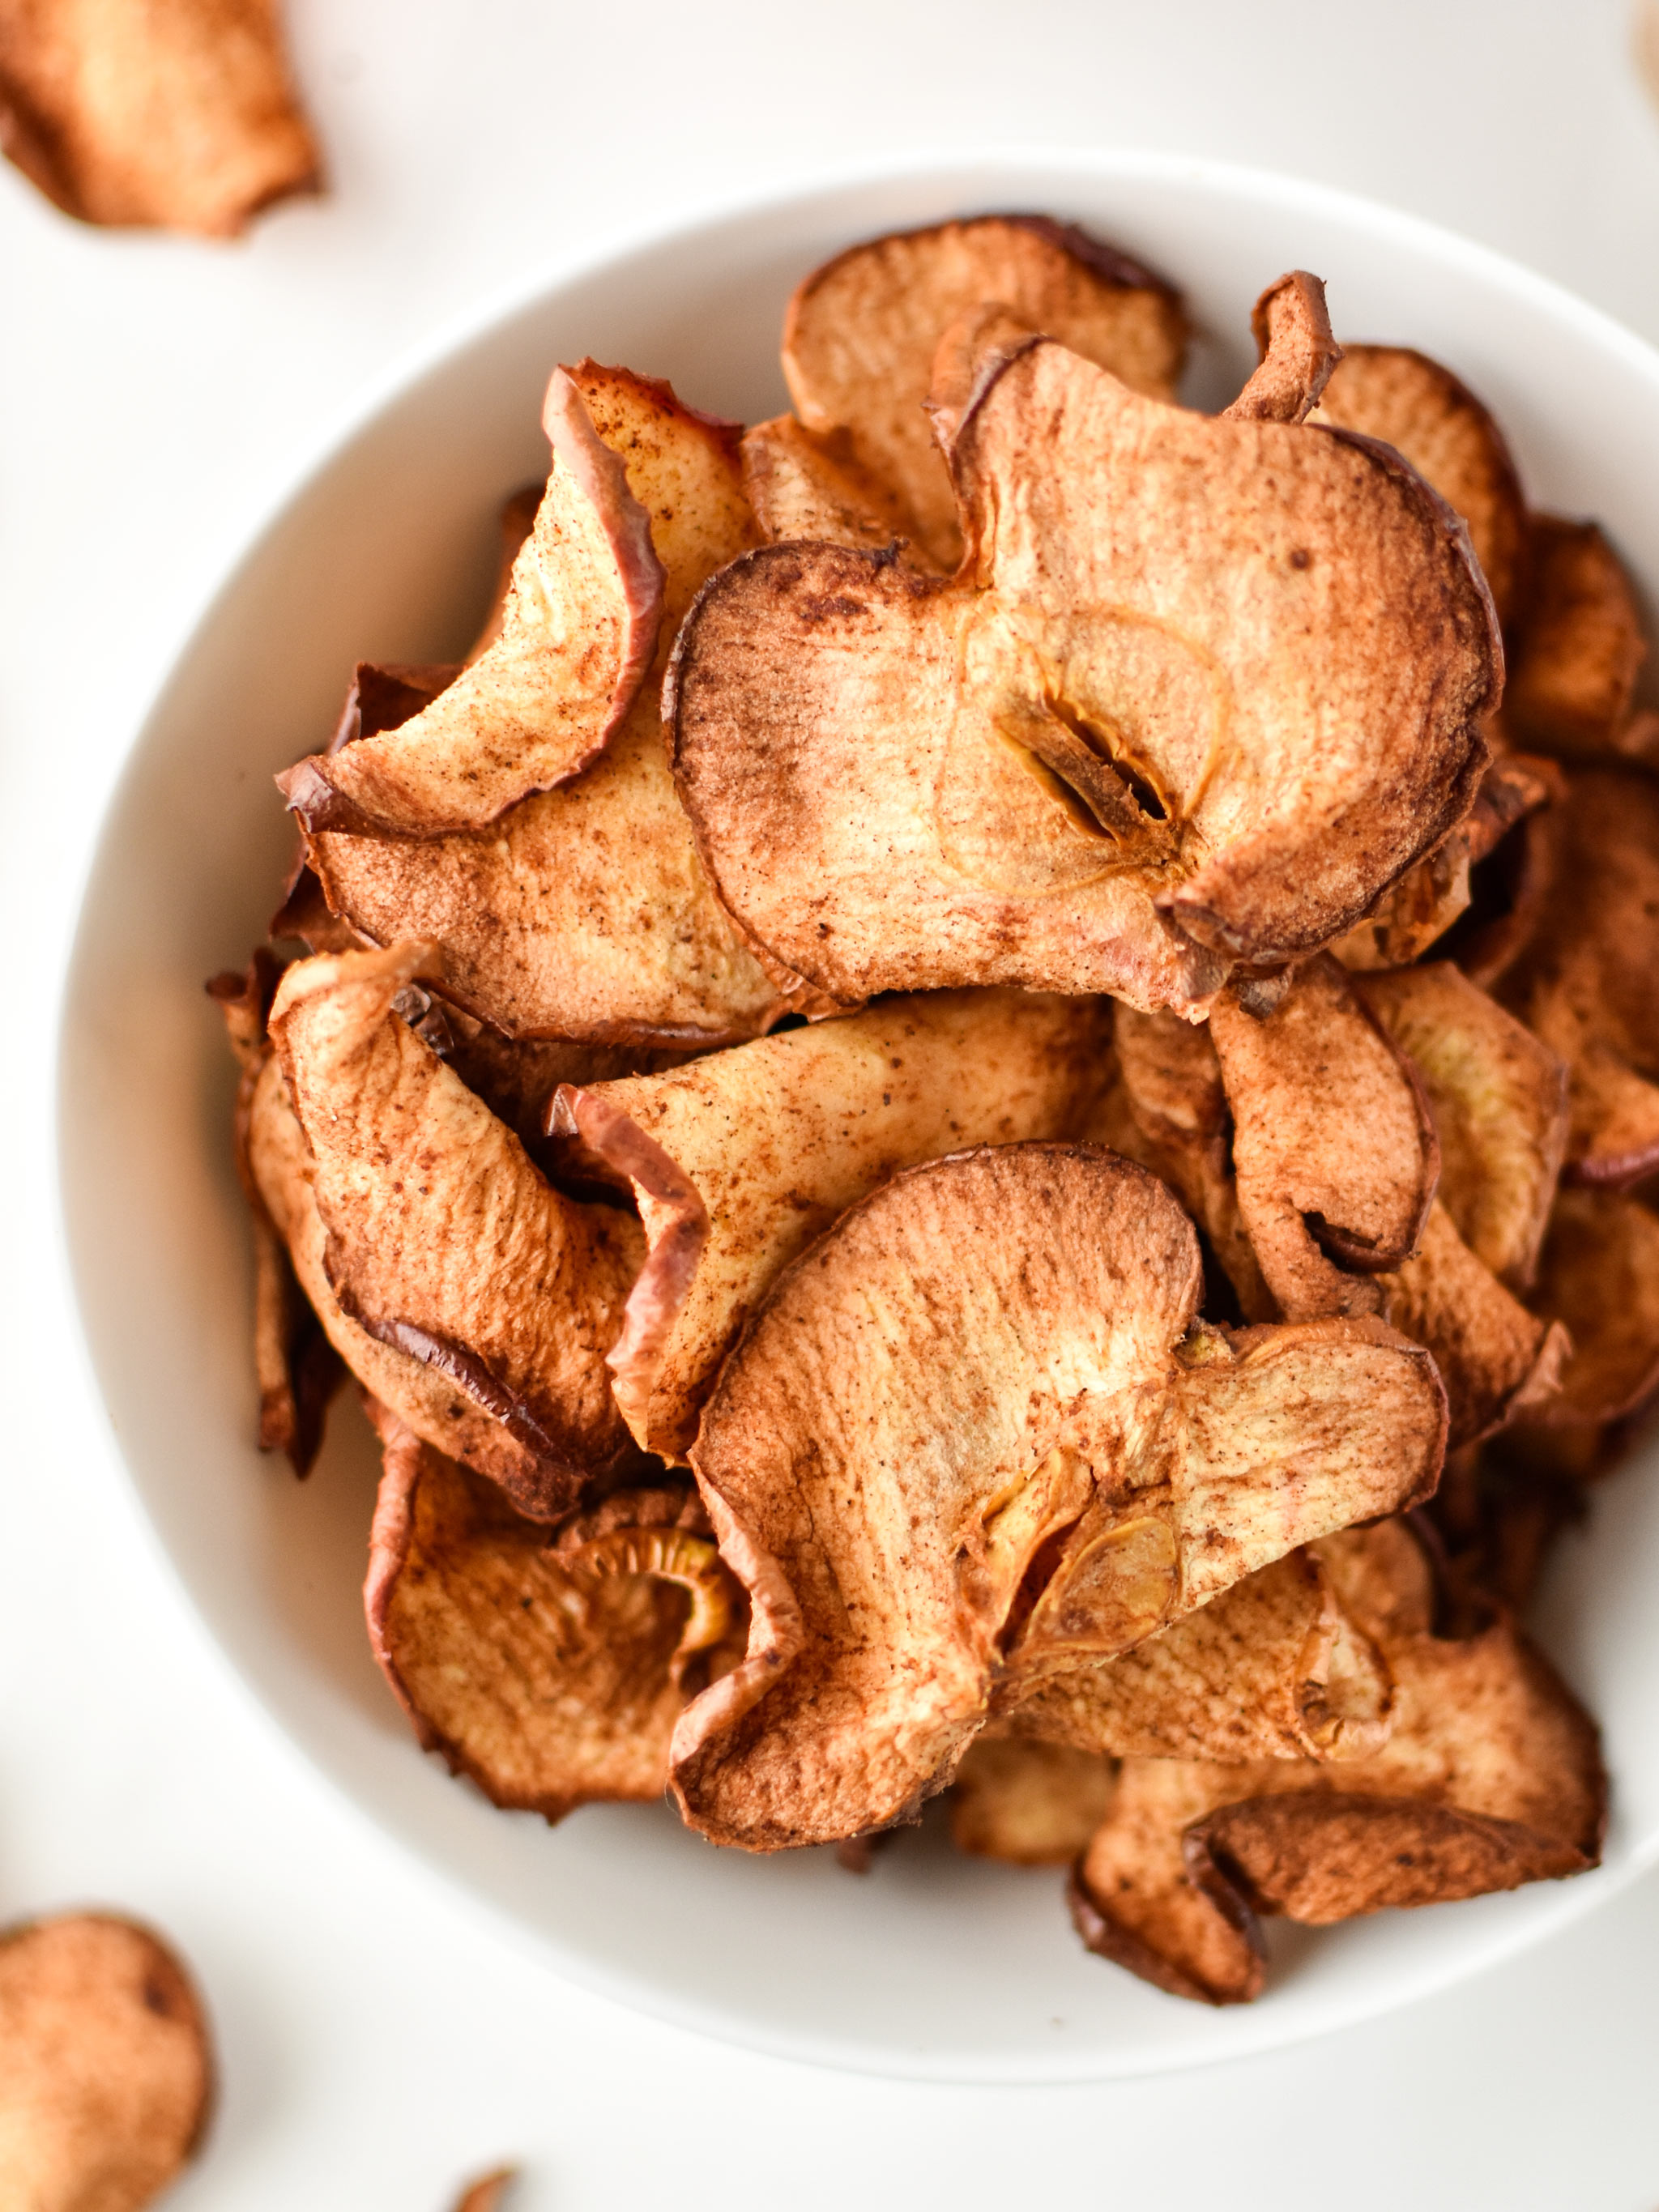 How to Make Apple Chips in an Air Fryer - apple chips shown from above